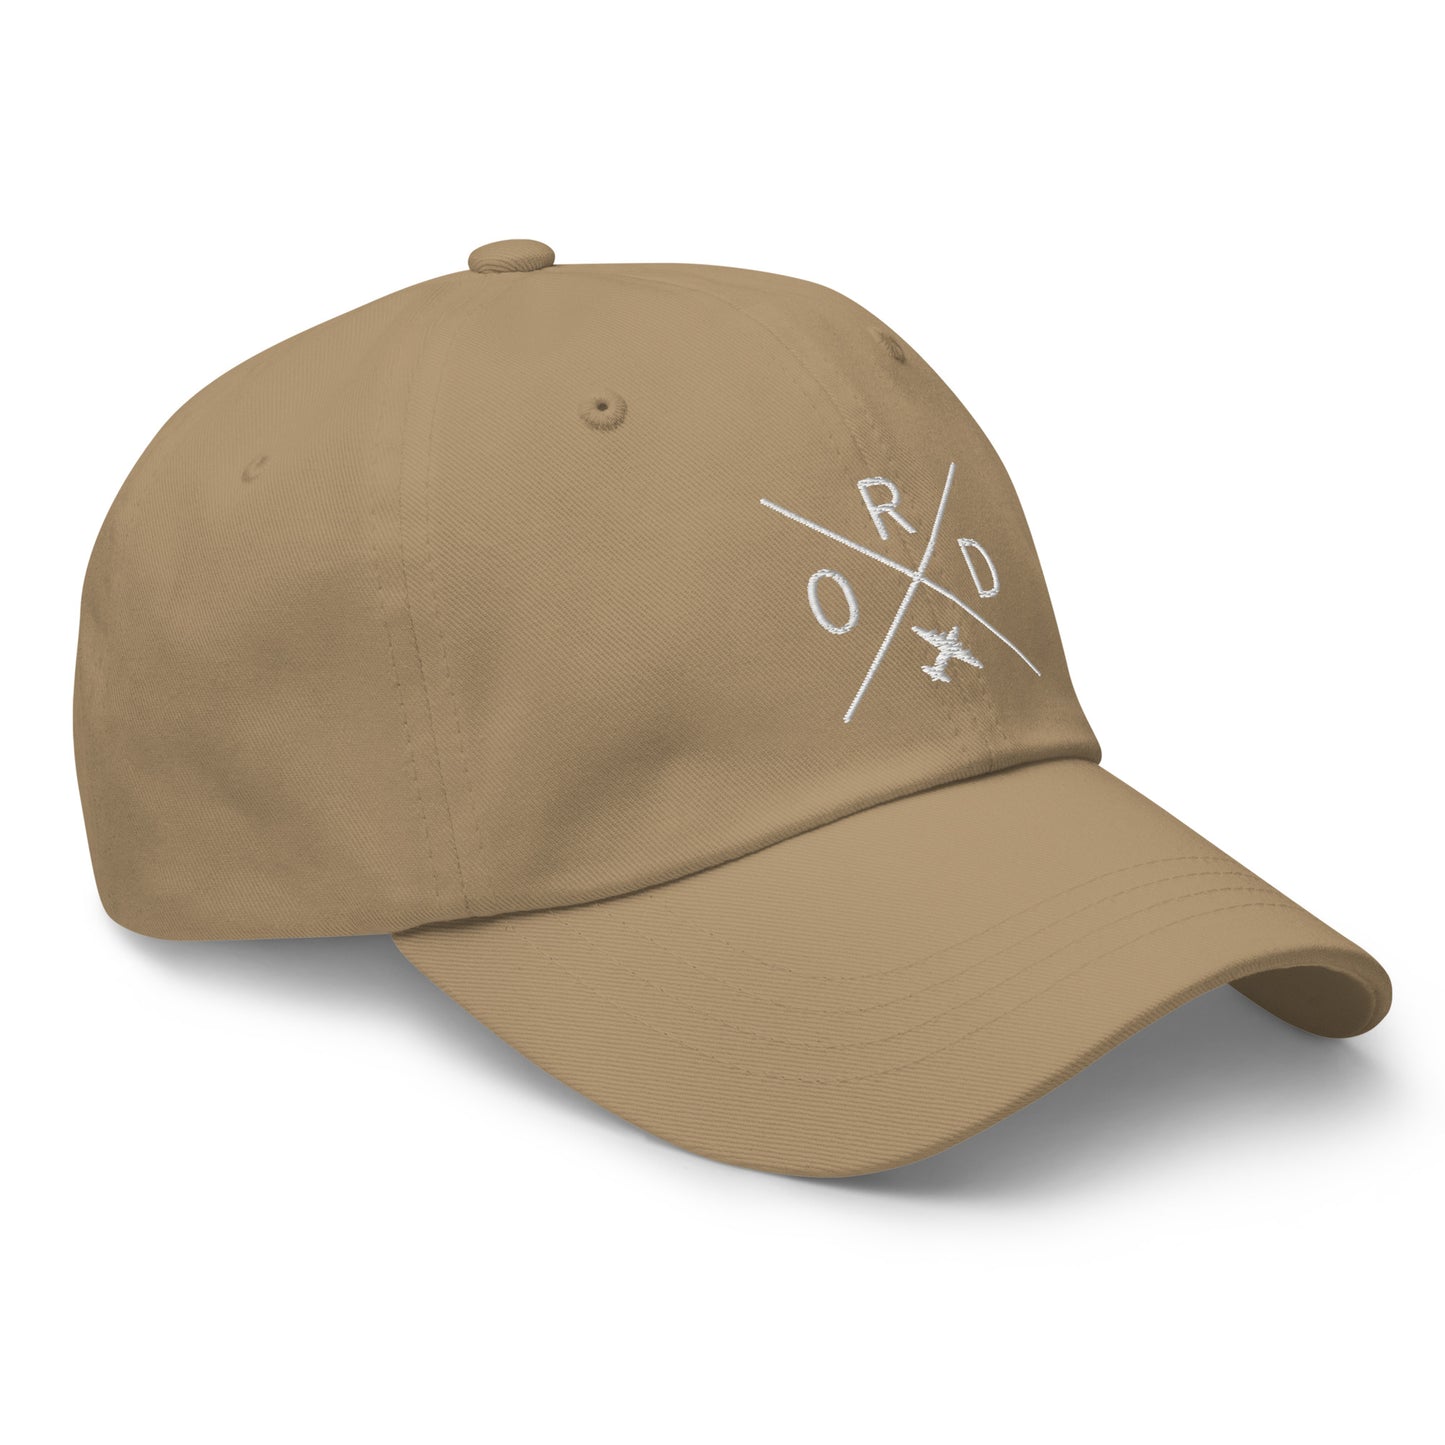 Crossed-X Dad Hat - White • ORD Chicago • YHM Designs - Image 23